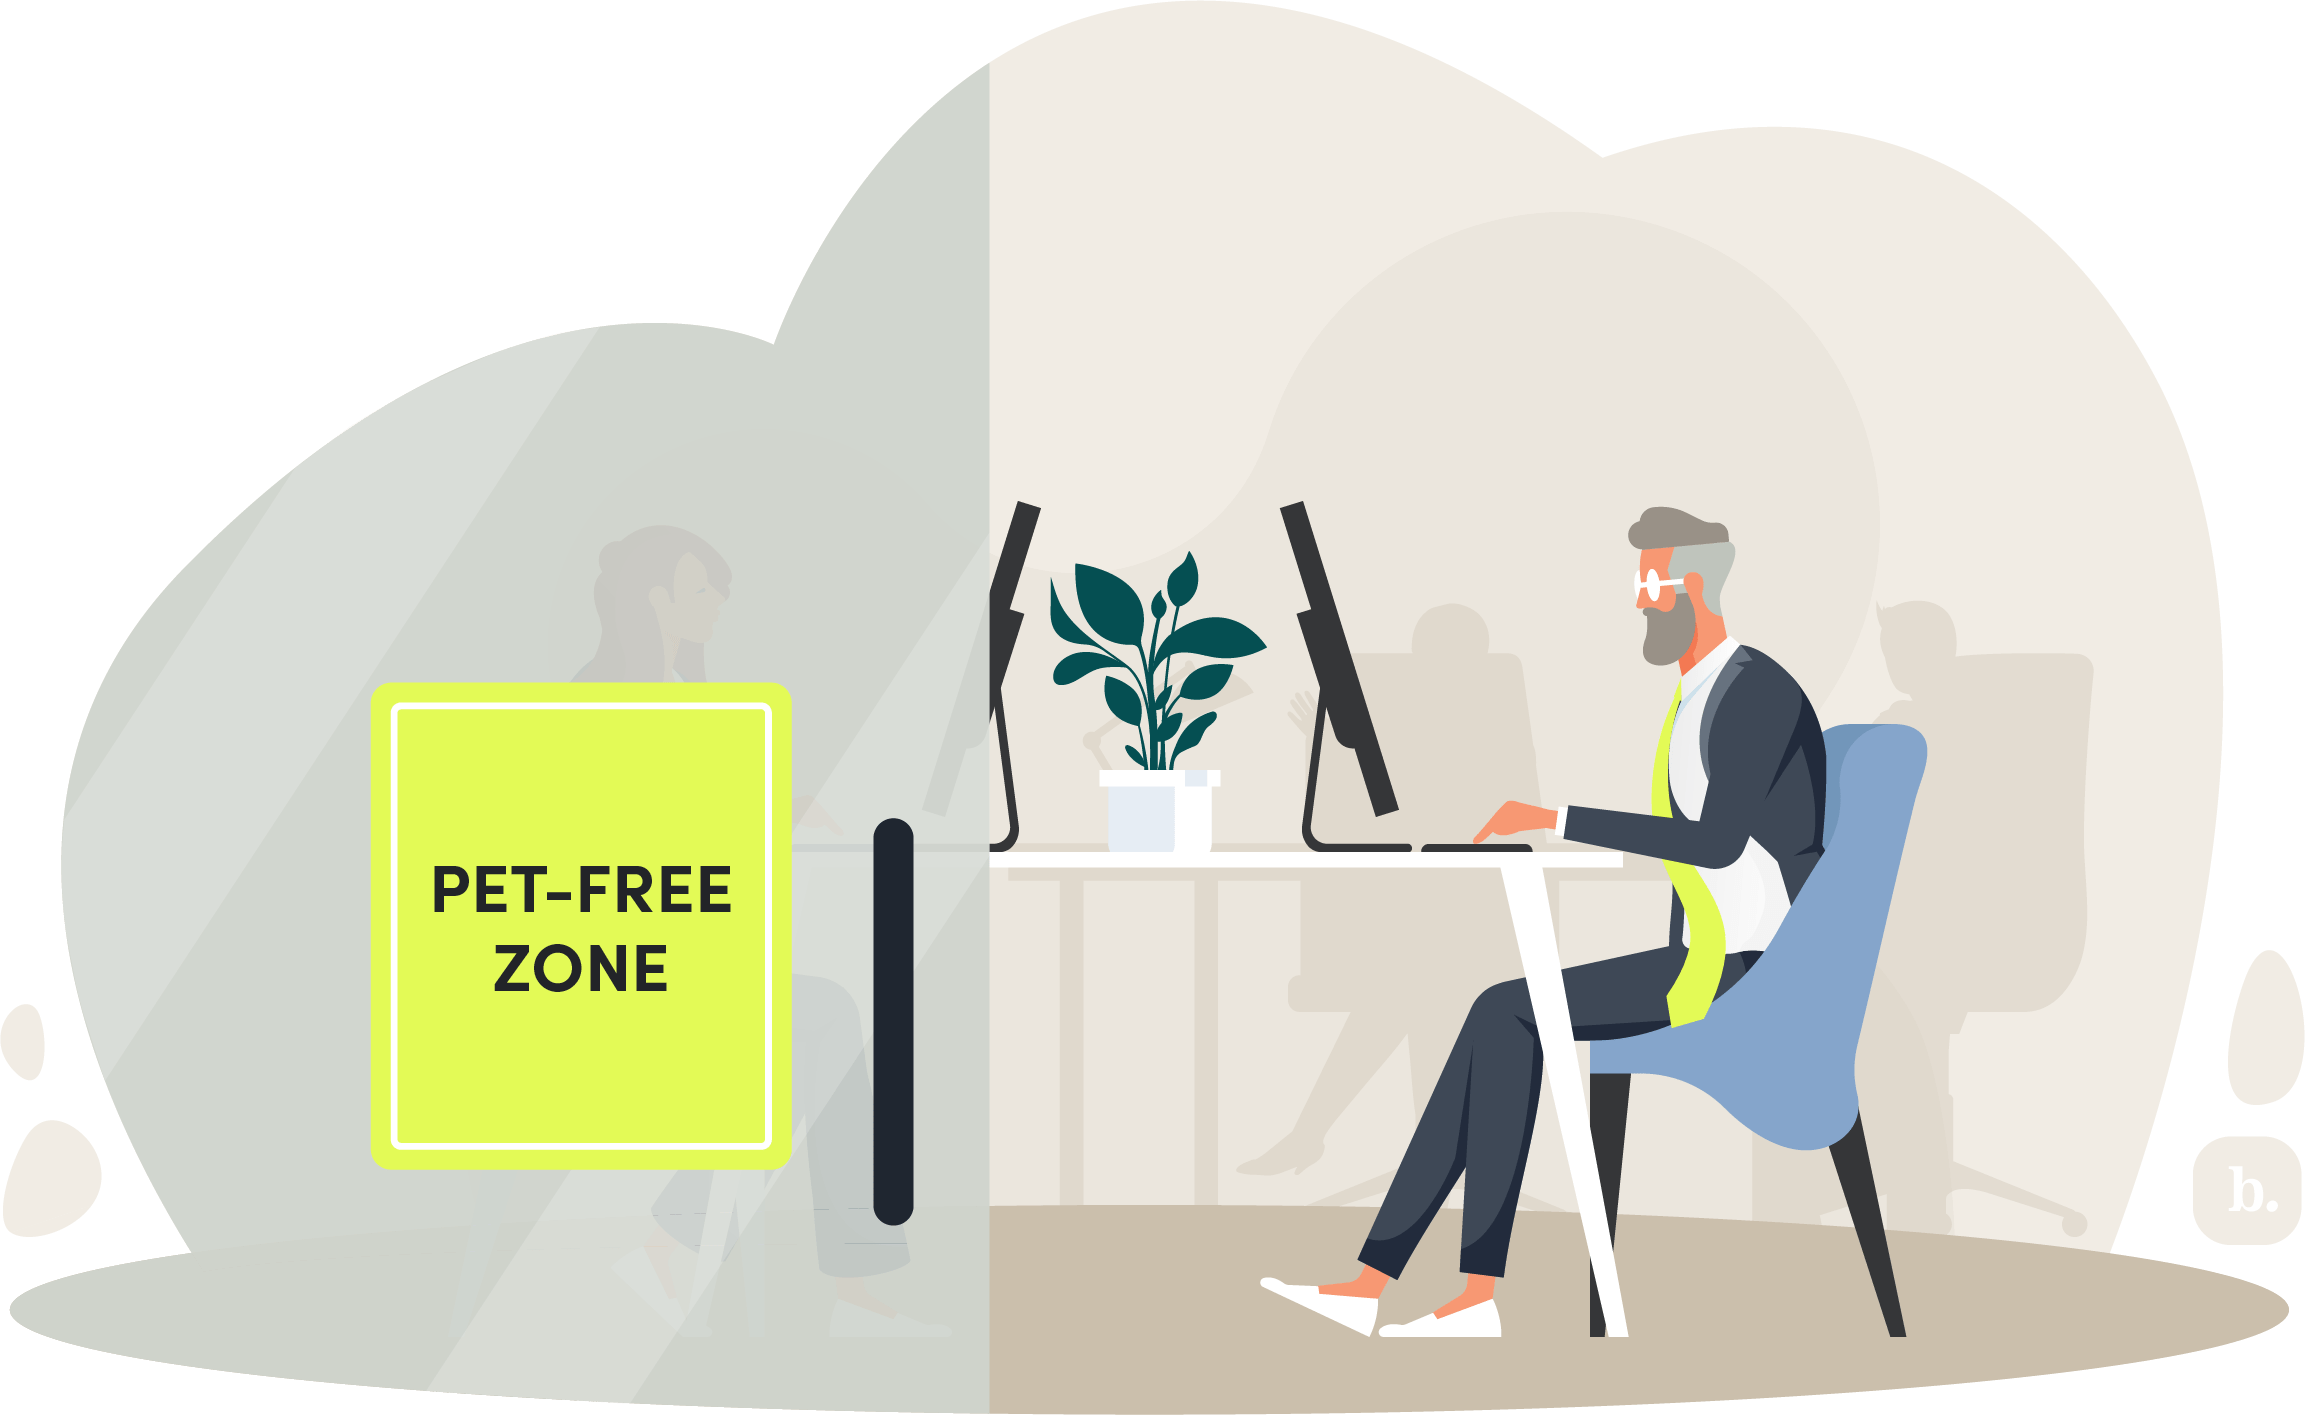 graphic of businessperson sitting at a desk near a sign that says "pet-free zone"